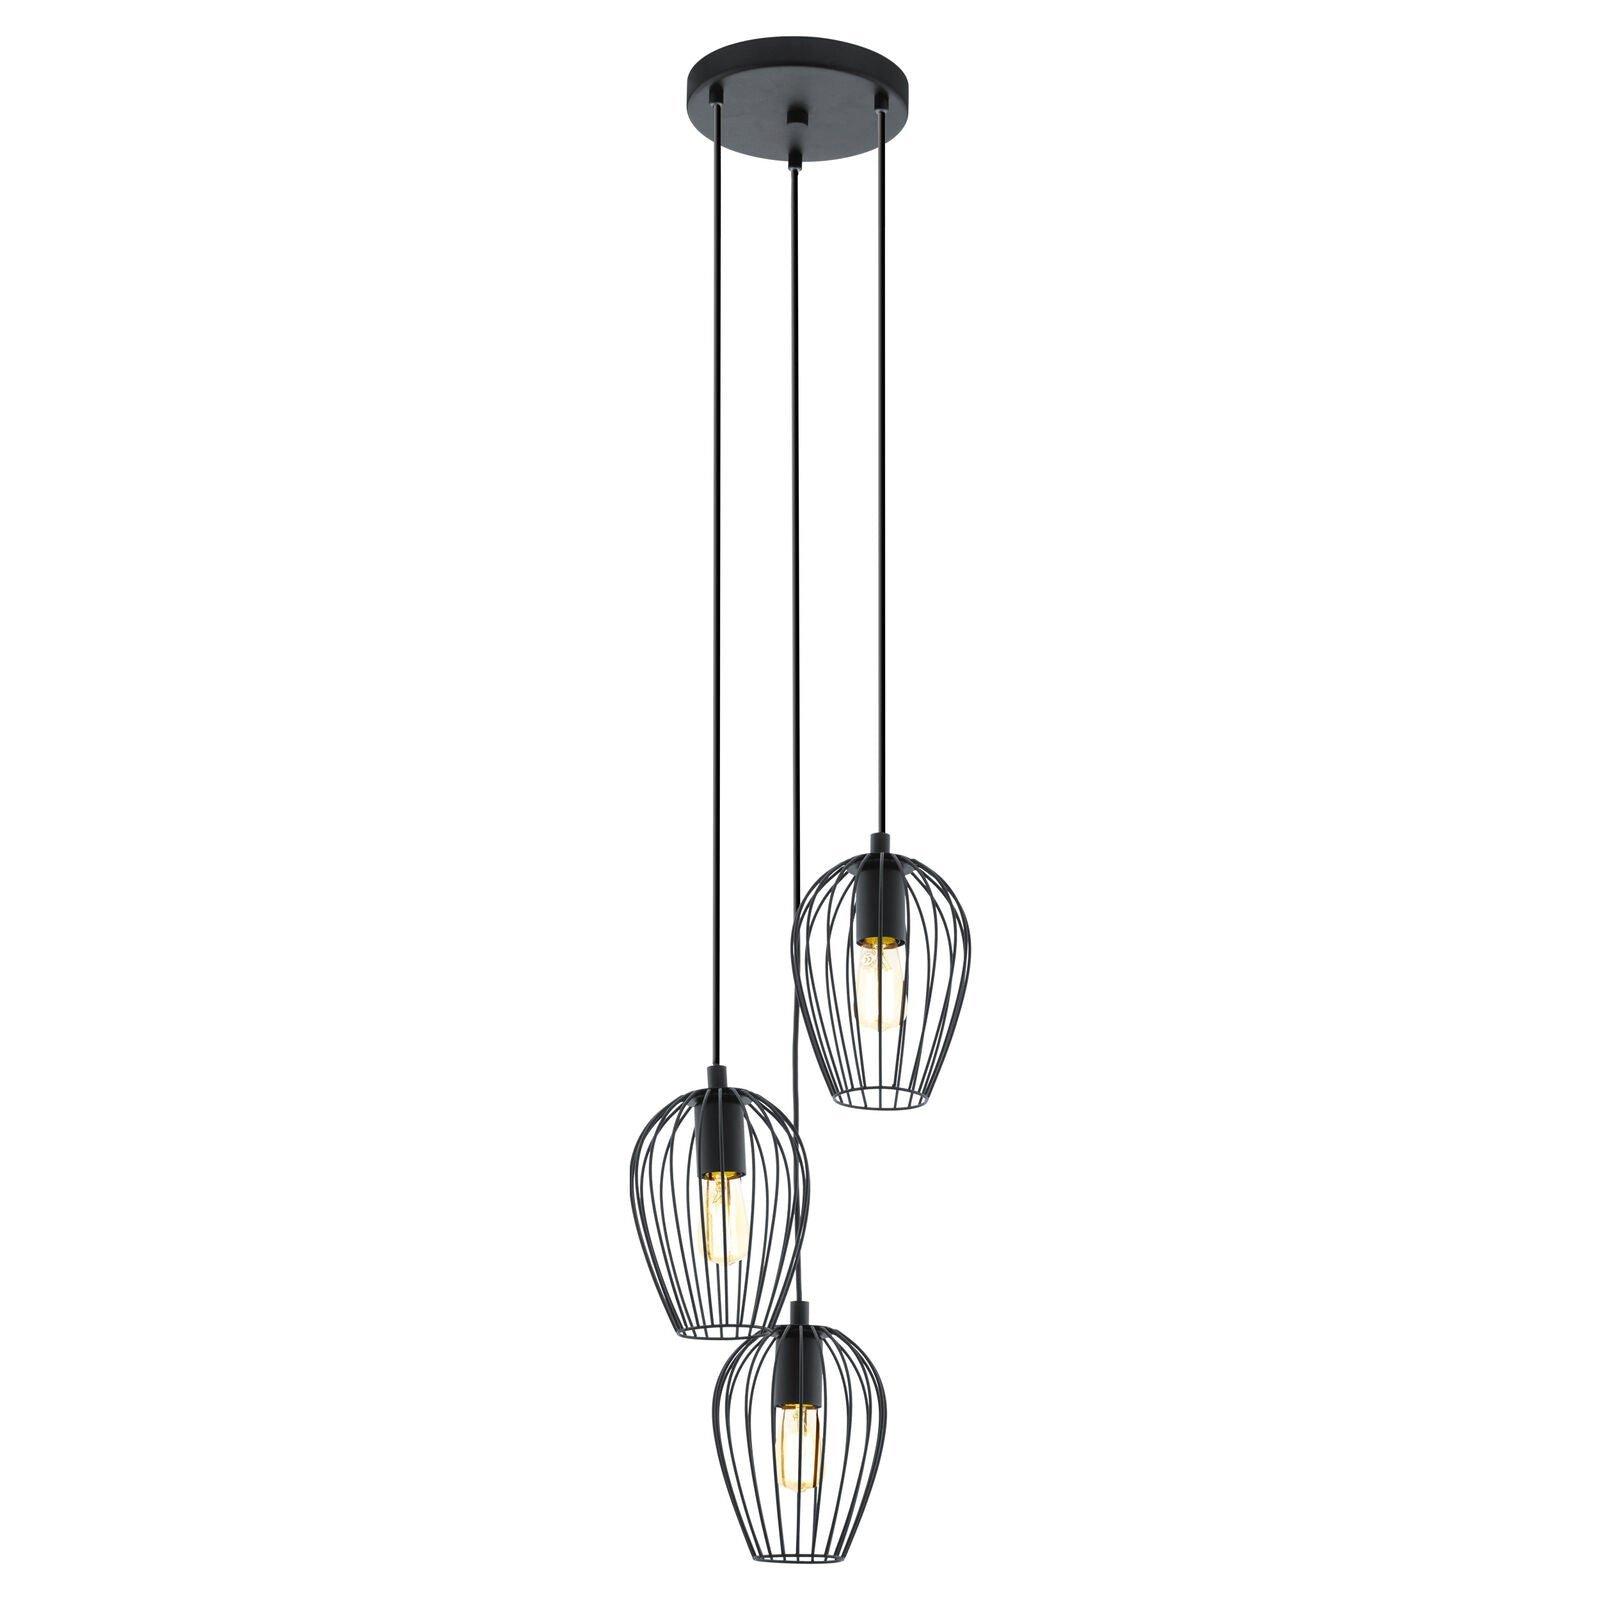 Hanging Ceiling Pendant Light Black Wire Cage 3x 60W E27 Hallway Feature Lamp